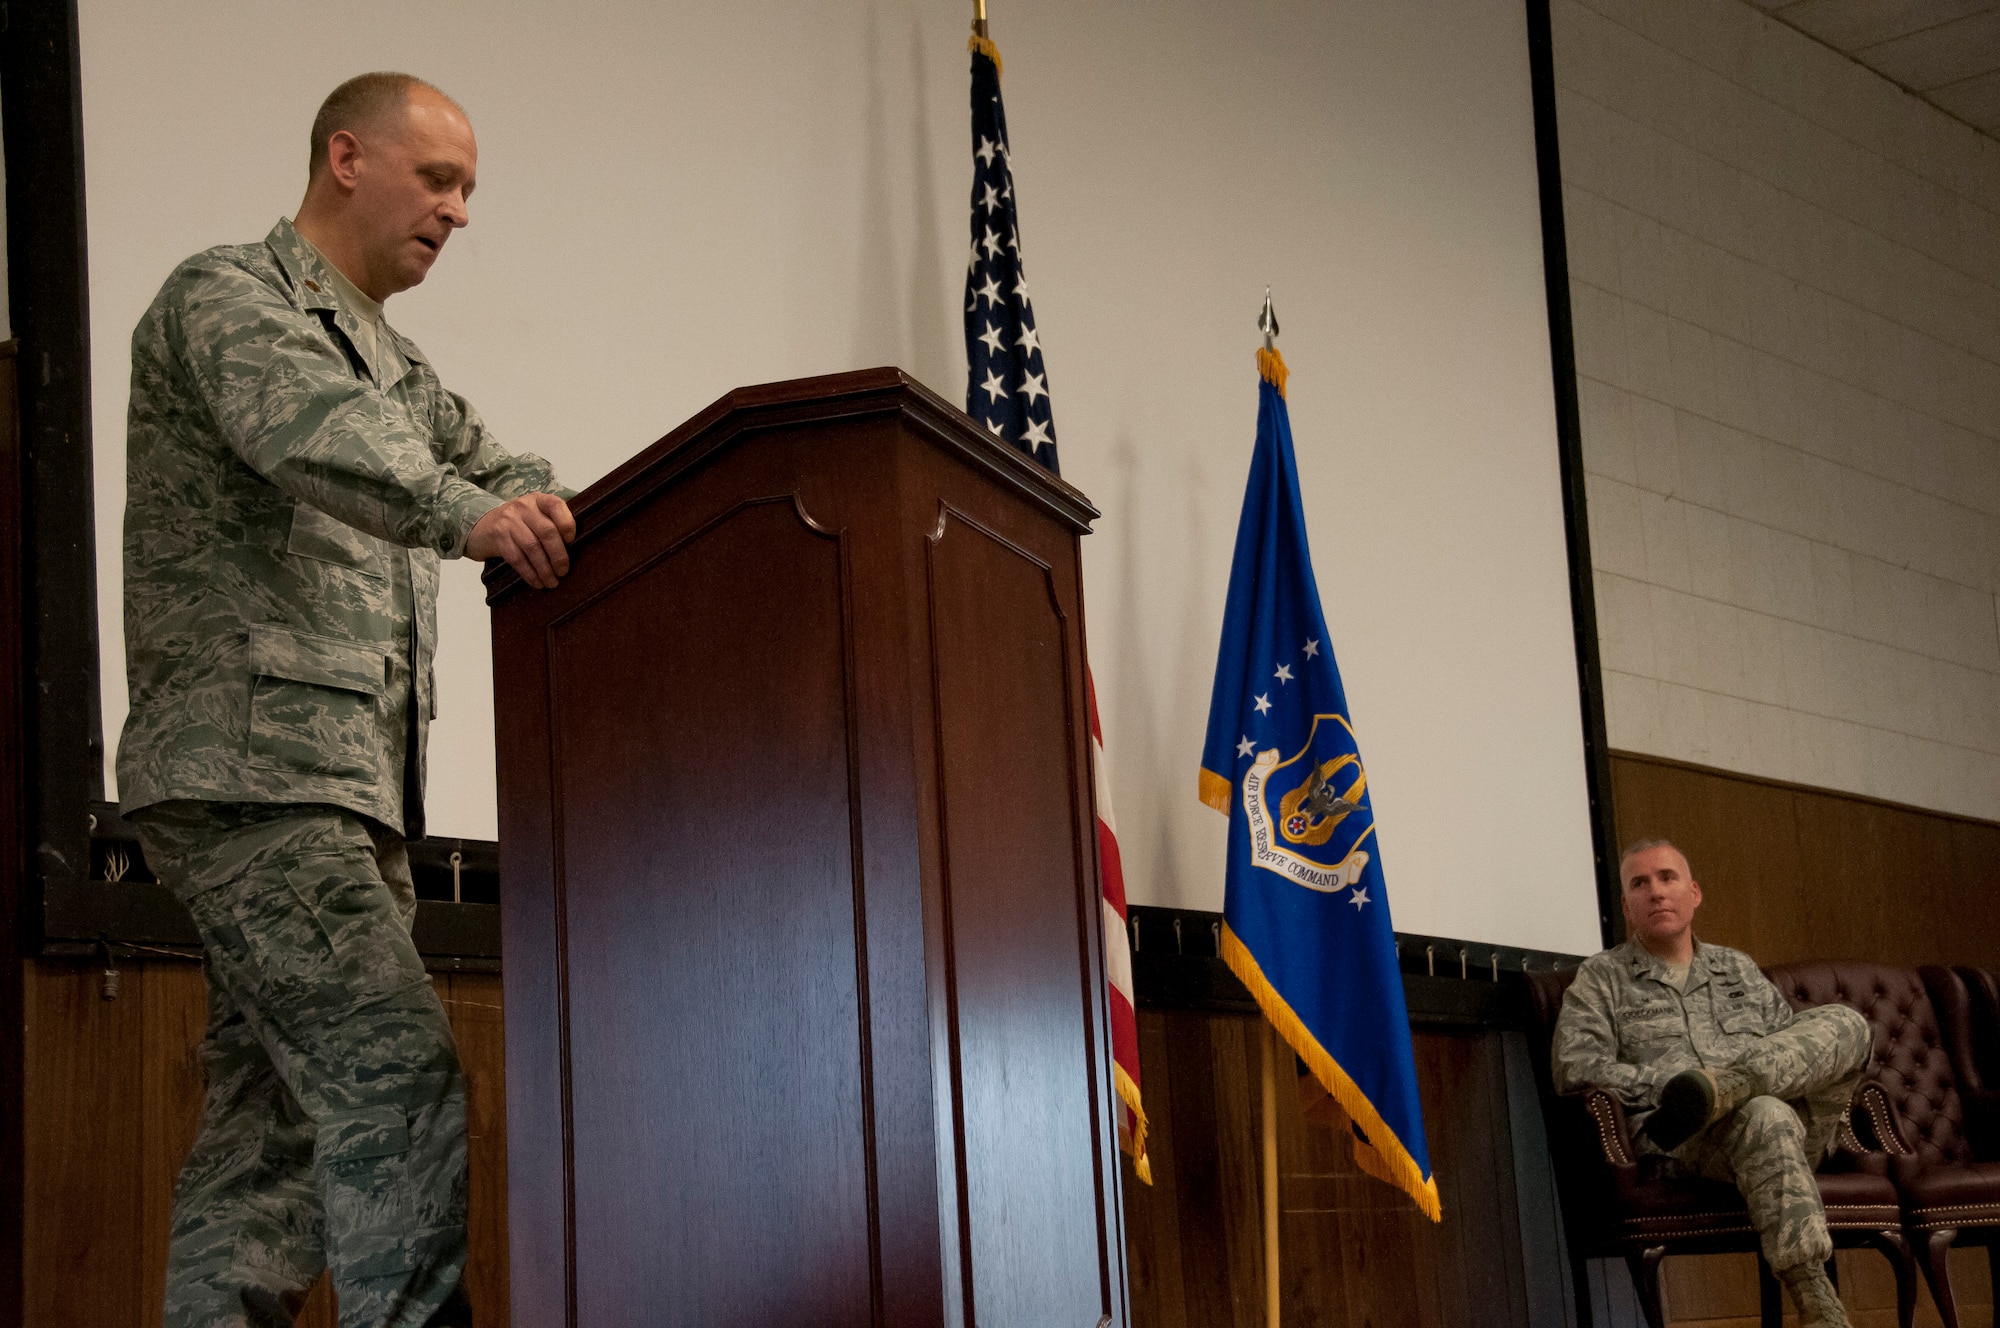 Major Justin O’Brien, commander of the 69th Aerial Port Squadron, Joint Base Andrews, Maryland, speaks to his new squadron after assuming command March 5, 2016. O’Brien is returning to the 69th APS after having served with the squadron twice before as an enlisted Airman and a company grade officer. (U.S. Air Force photo/Staff Sgt. Tiffany Lindemann) 